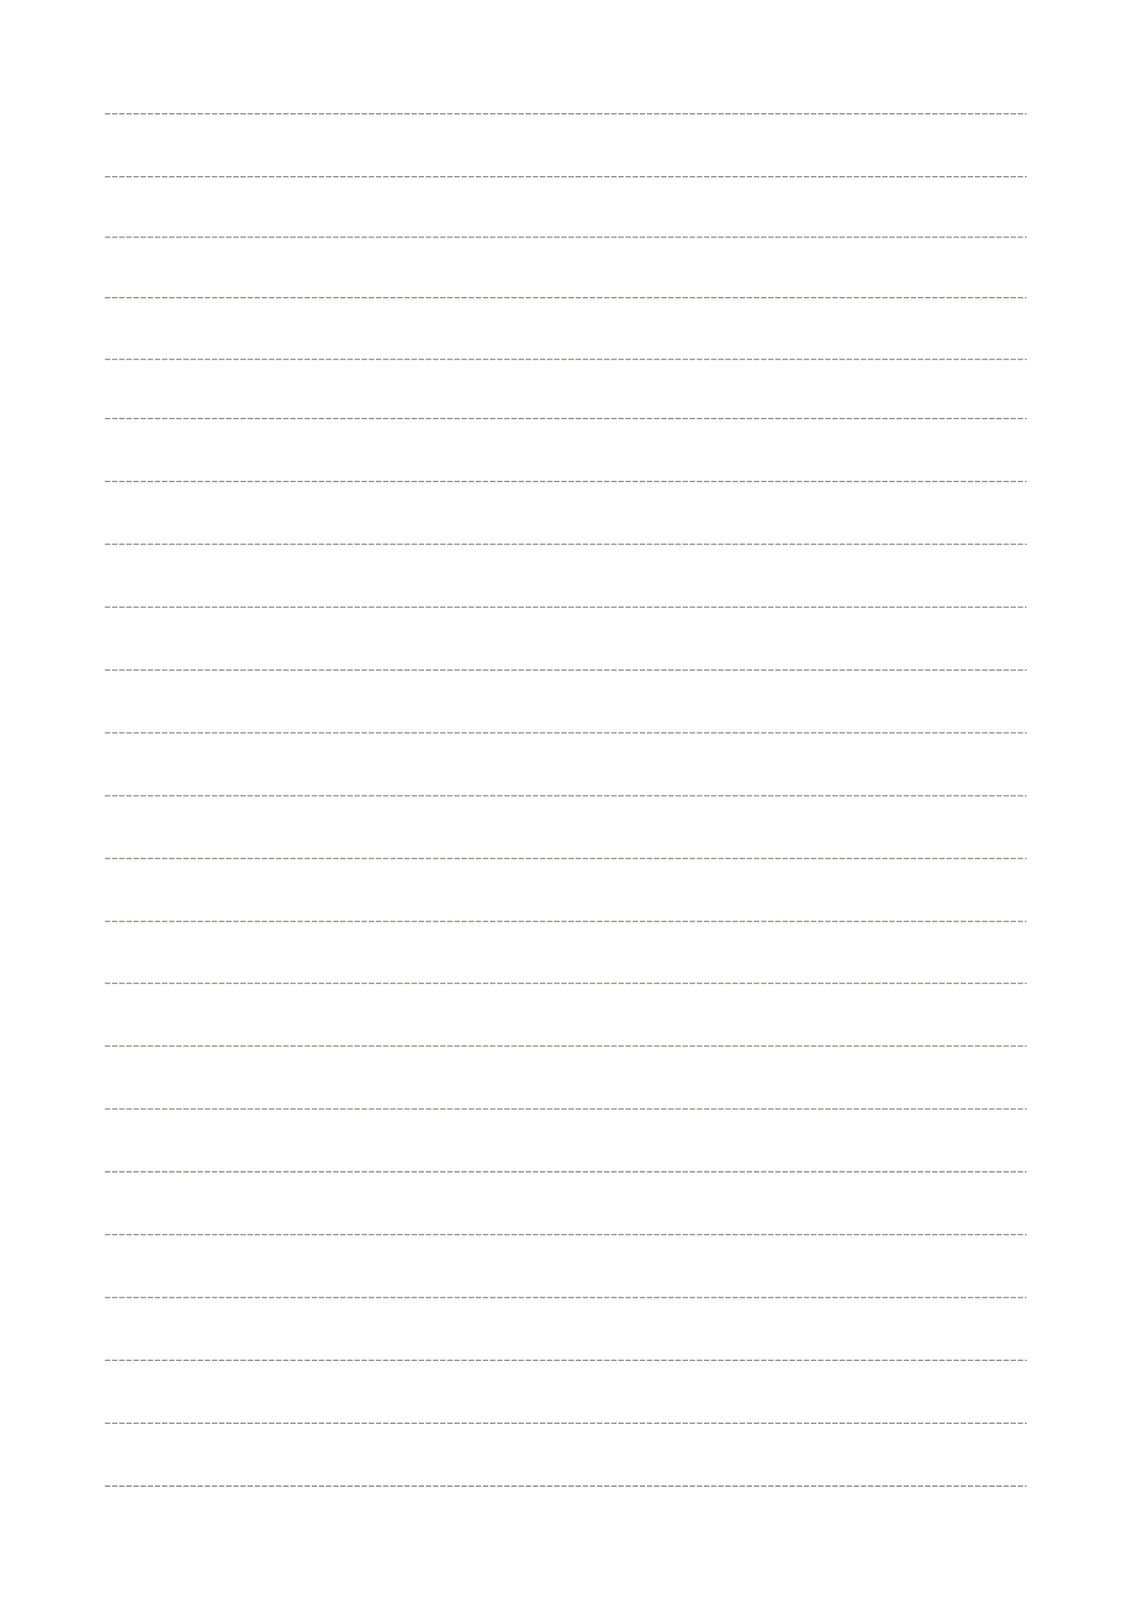 Blank Lined Paper Font